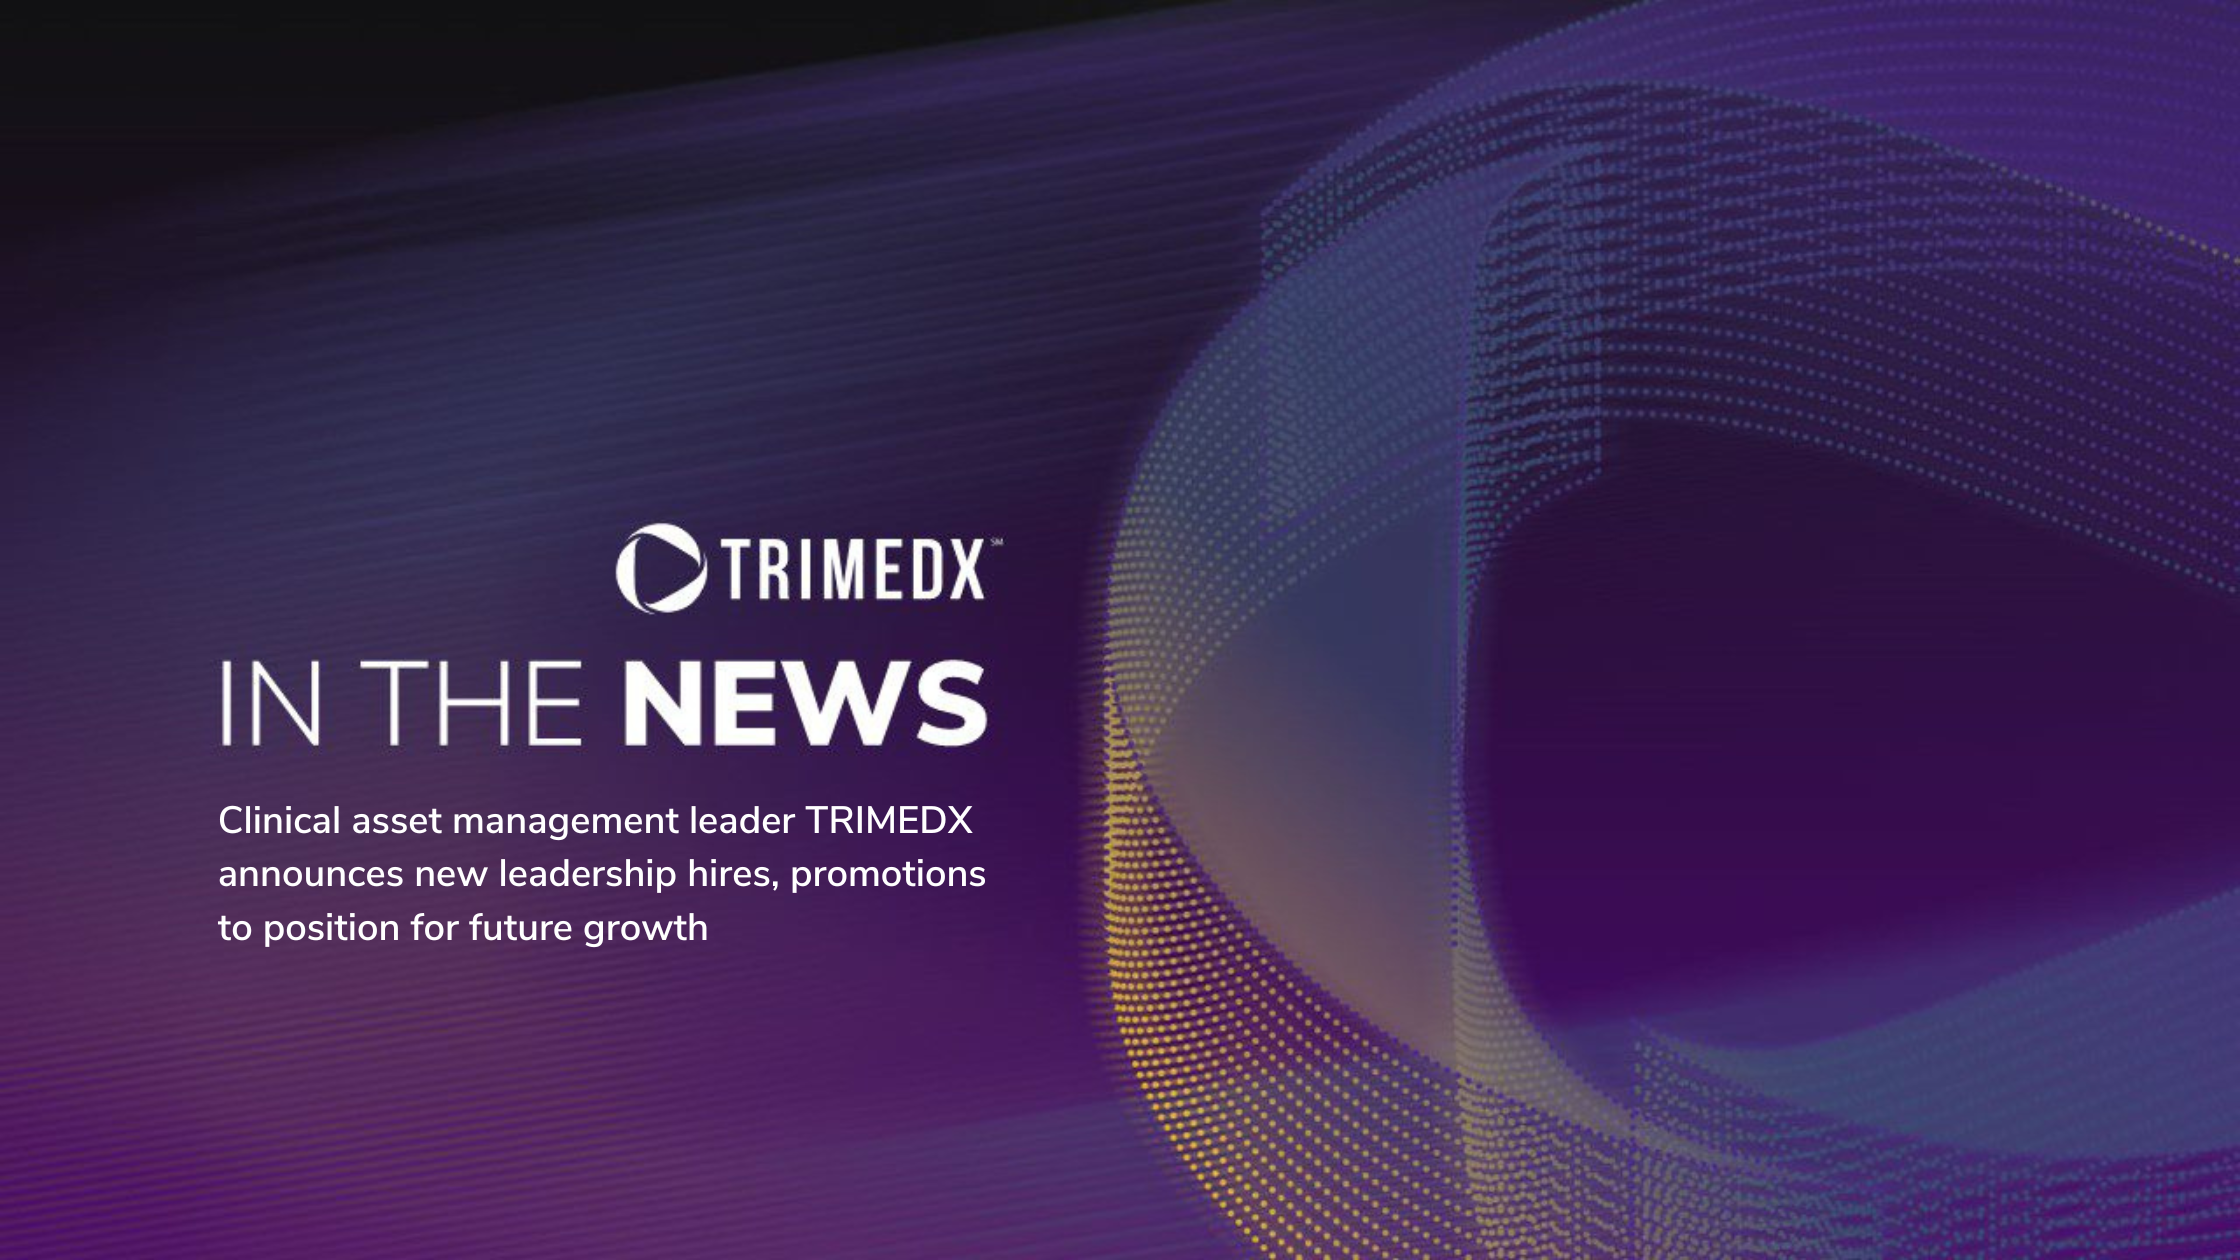 Clinical asset management leader TRIMEDX announces new leadership hires, promotions to position for future growth